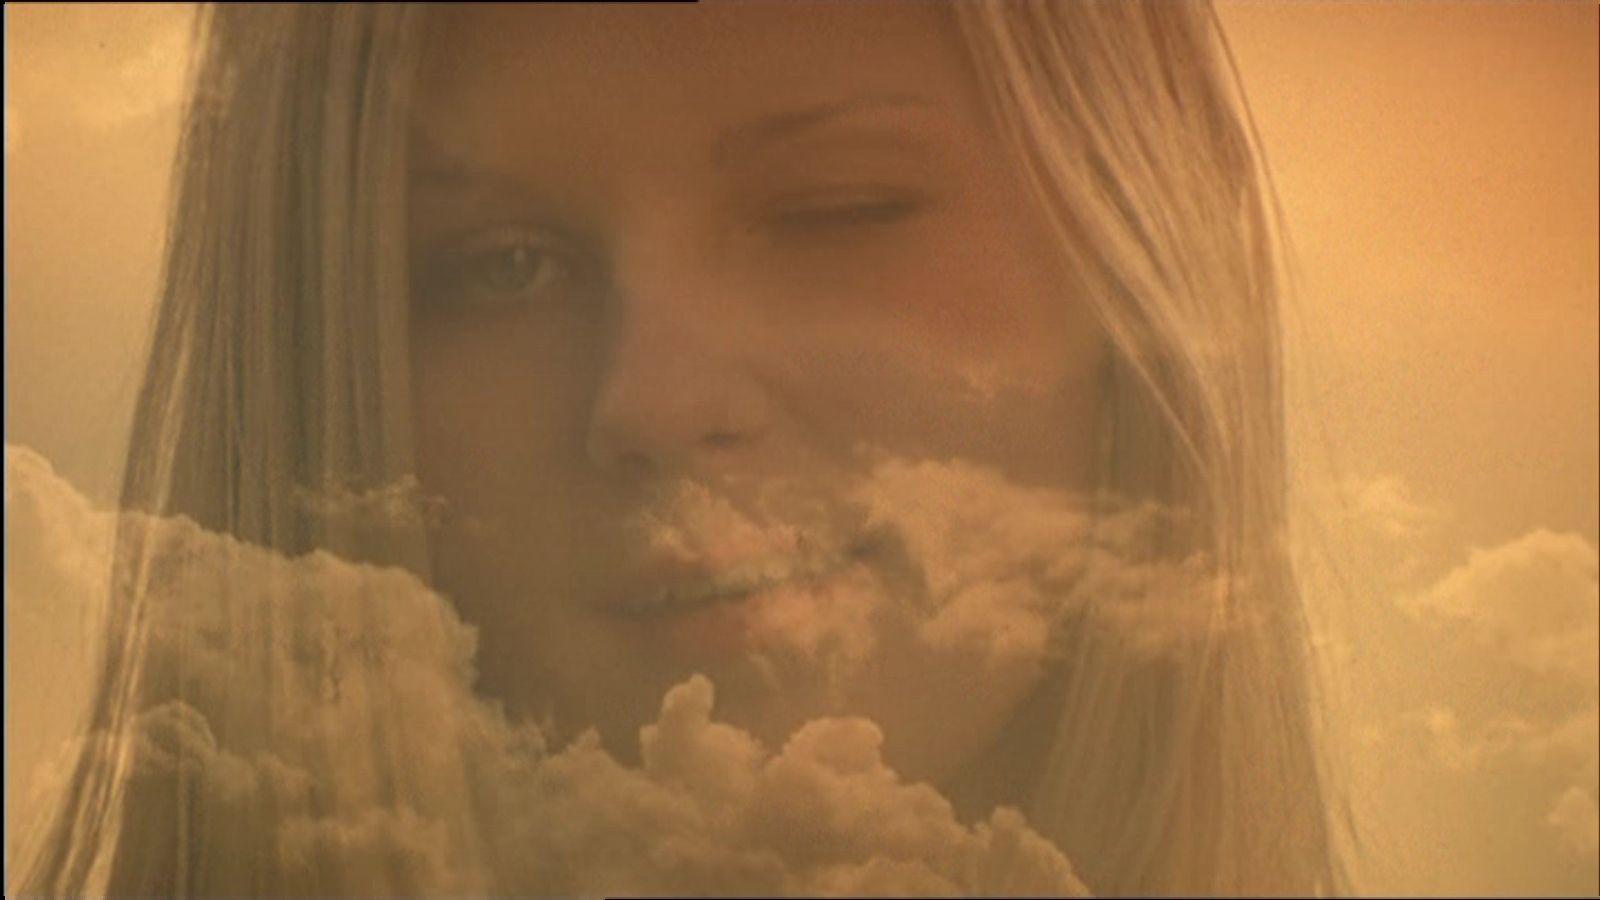 The Virgin Suicides Wallpapers Wallpaper Cave